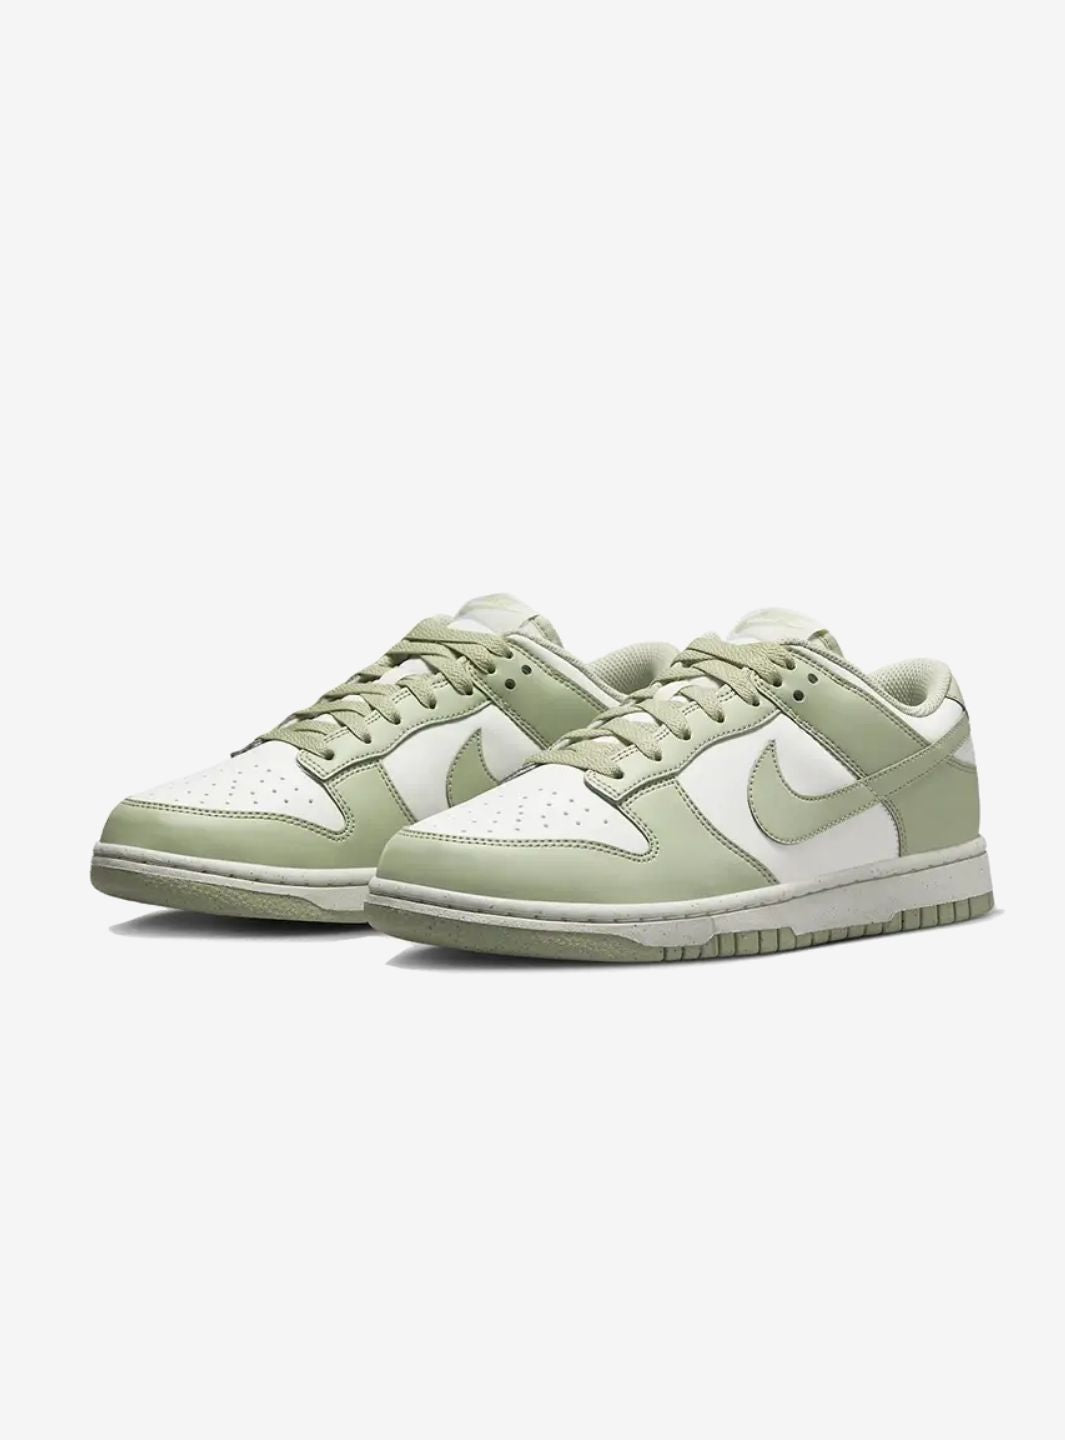 Nike Dunk Low Next Nature Olive Aura - HF5384-300 | ResellZone